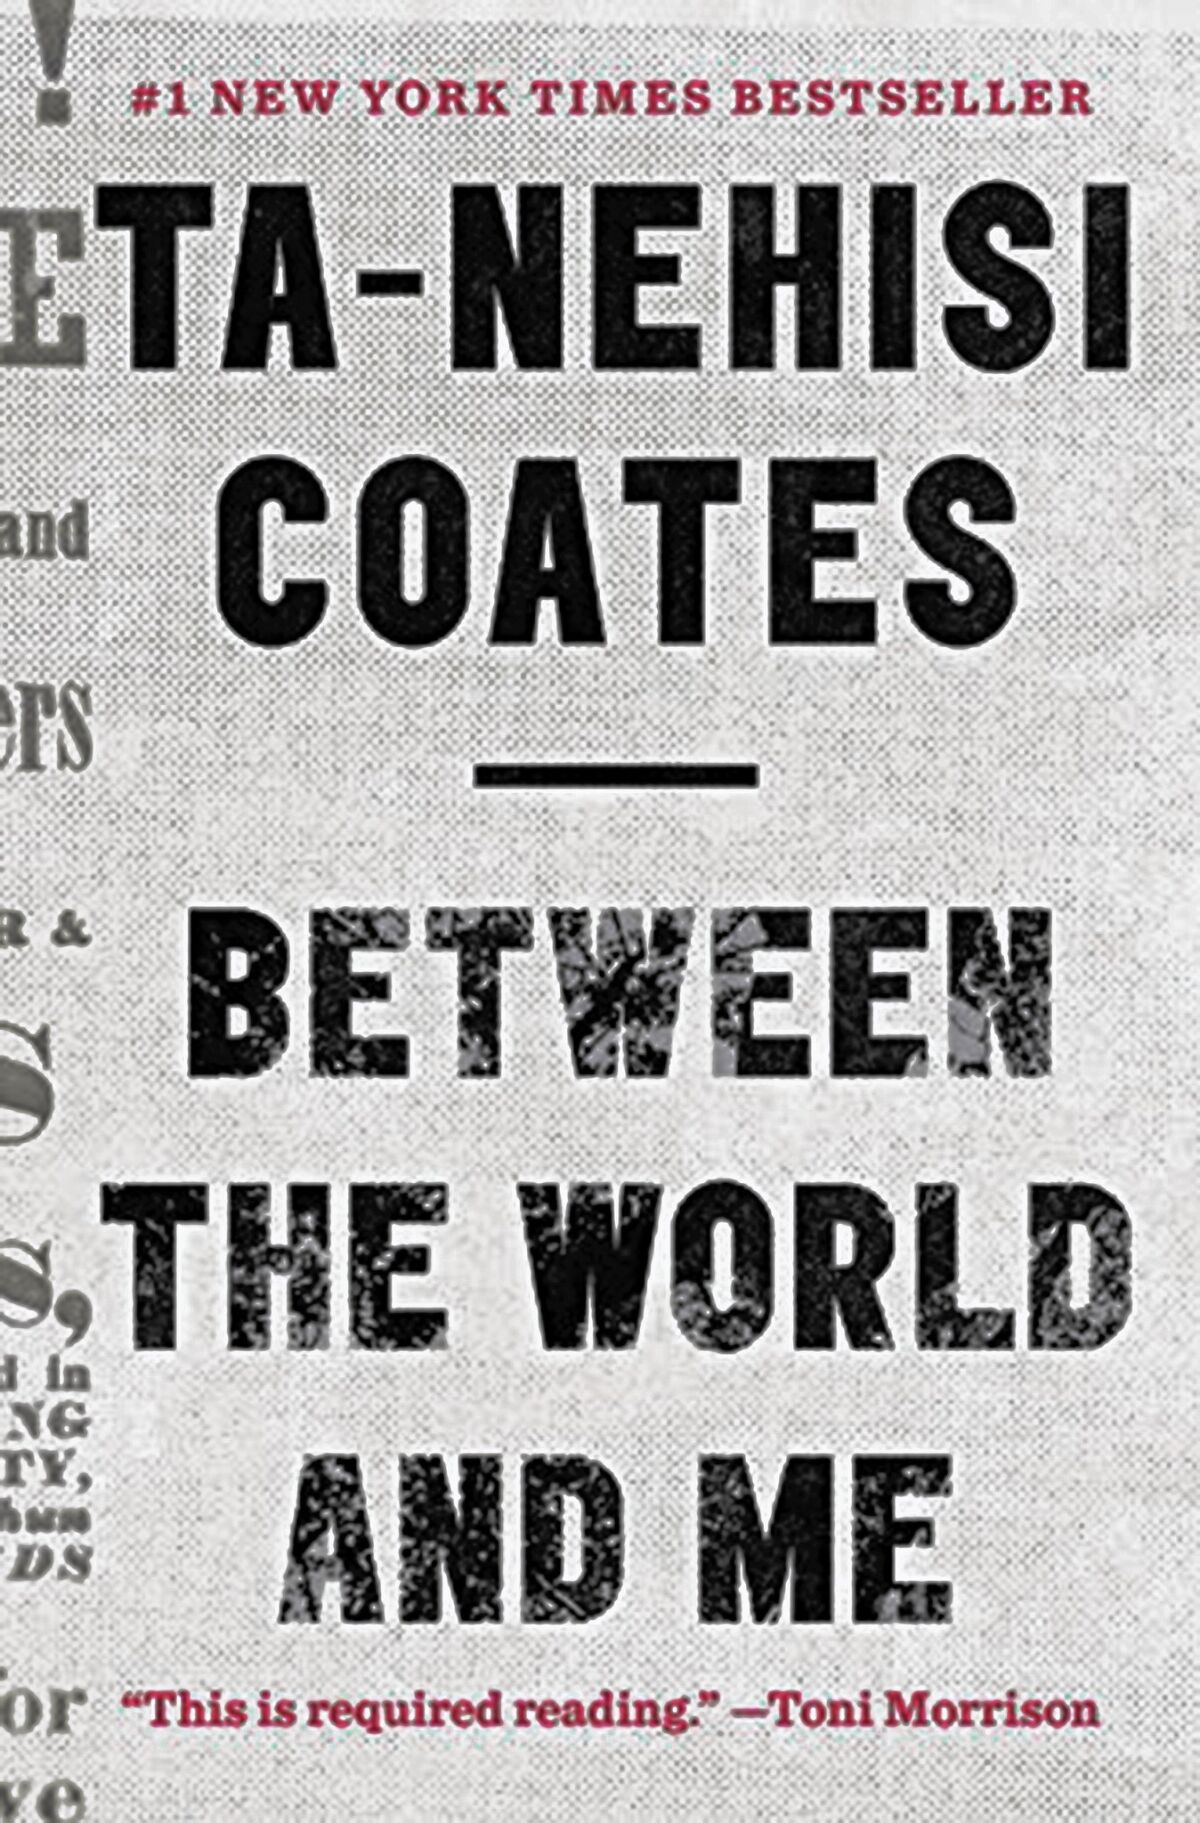 Ta-Nehisi Coates' "Between the World and Me" is written in the intimate form of a letter to his teenage son.